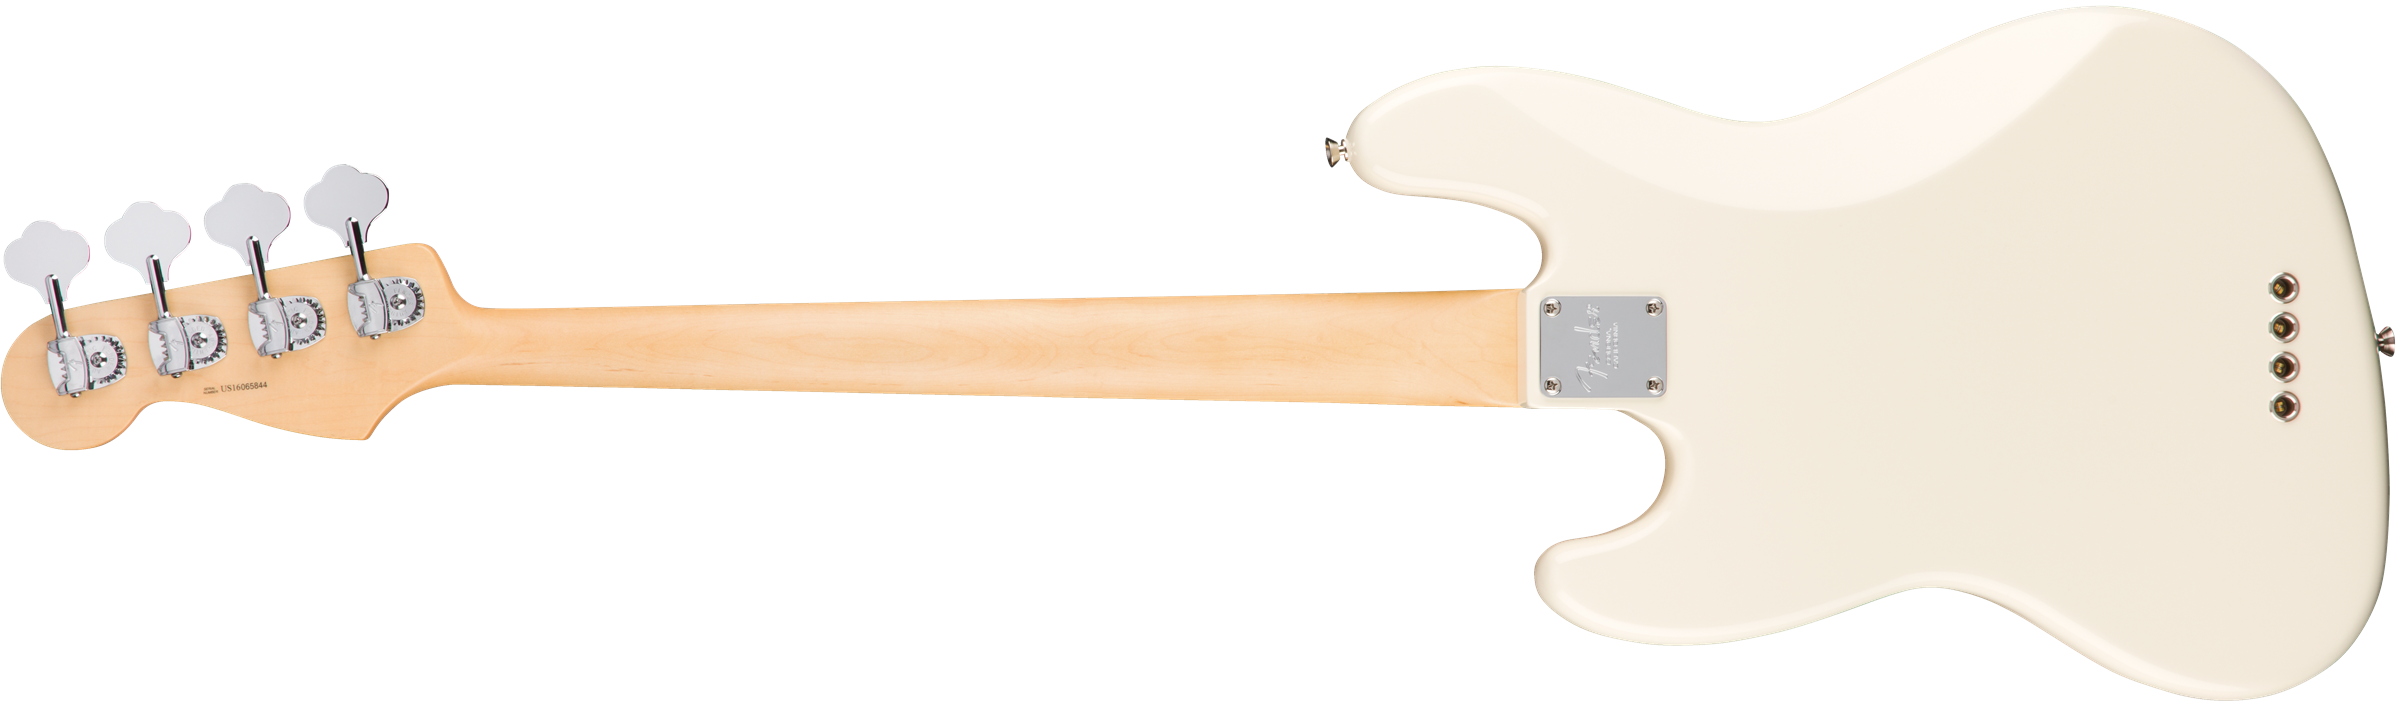 Fender Jazz Bass American Professional 2017 Usa  Mn - Olympic White - Solid body electric bass - Variation 1